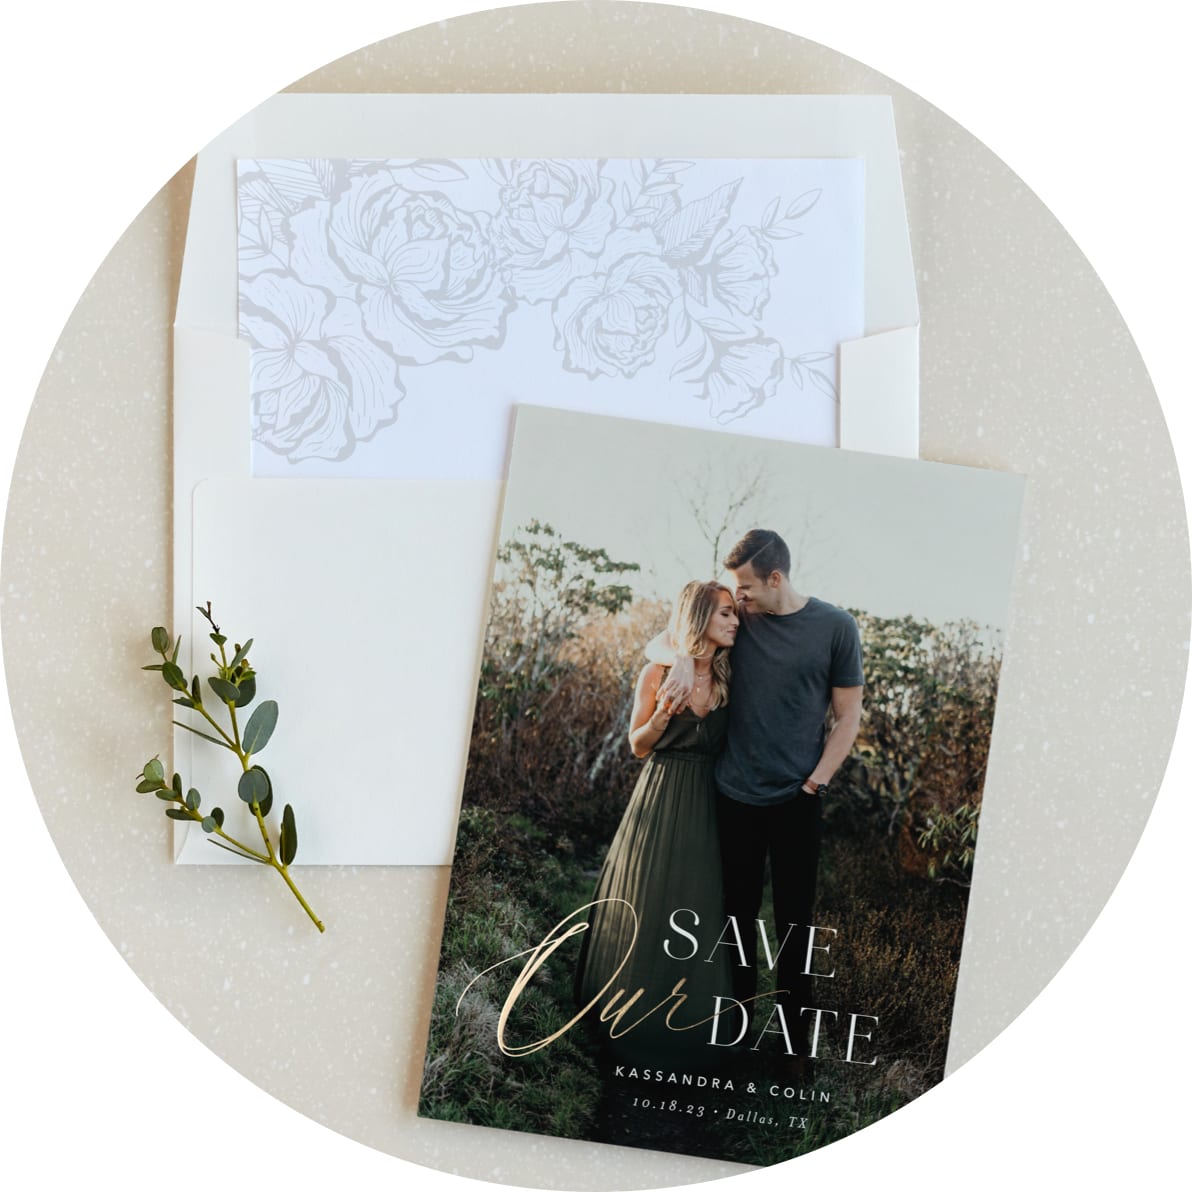 100 Personalized Custom Bride and Groom Bridal Wedding Save The Date Cards 